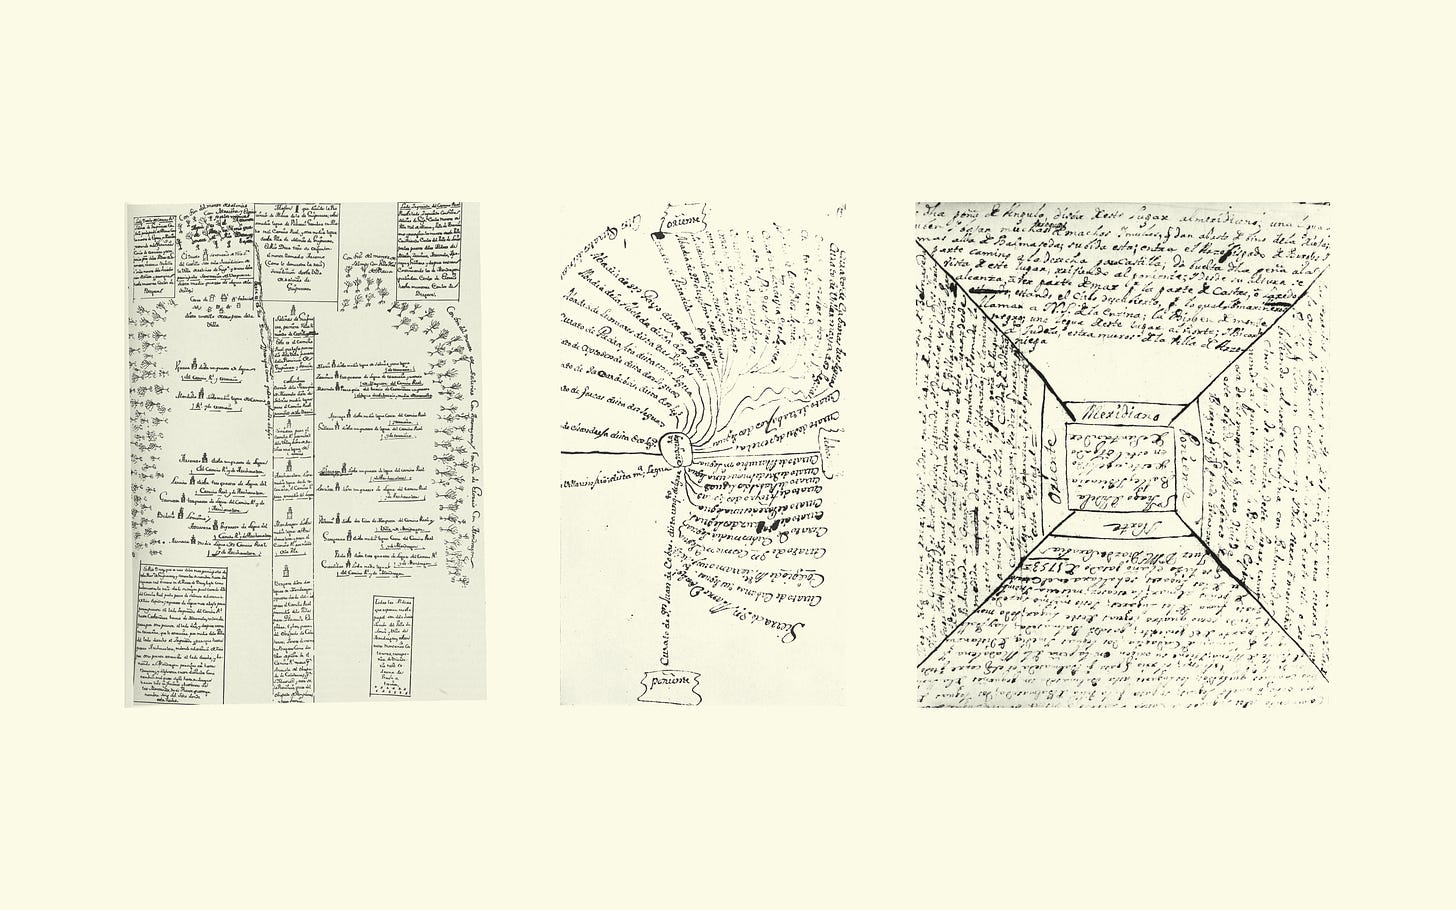 three hand-drawn maps. in the first, blocks of text take up most of the map and there are trees drawn on the outsides. the second forms a spiral shape around a center circle with writing, and the third is a series of concentric rectangles with text written around it